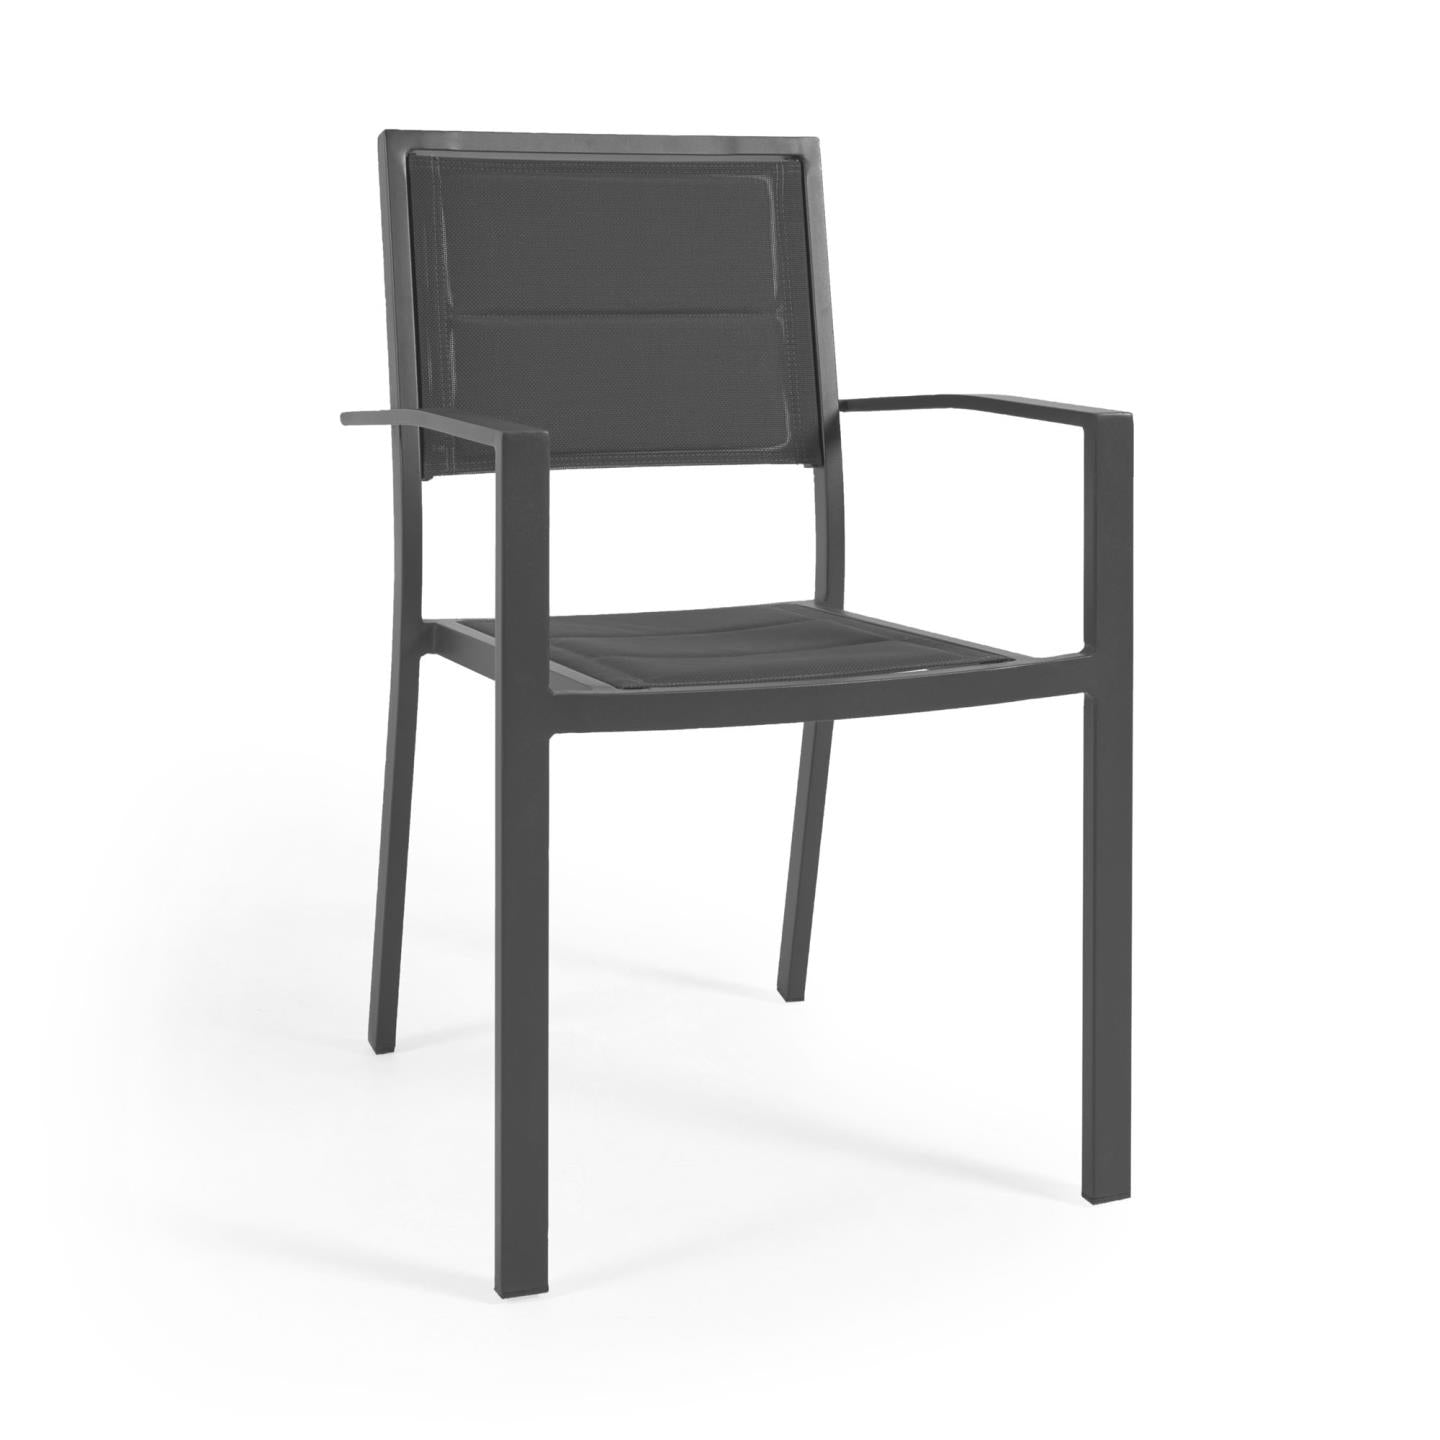 Sirley stackable outdoor chair in black aluminium and texteline